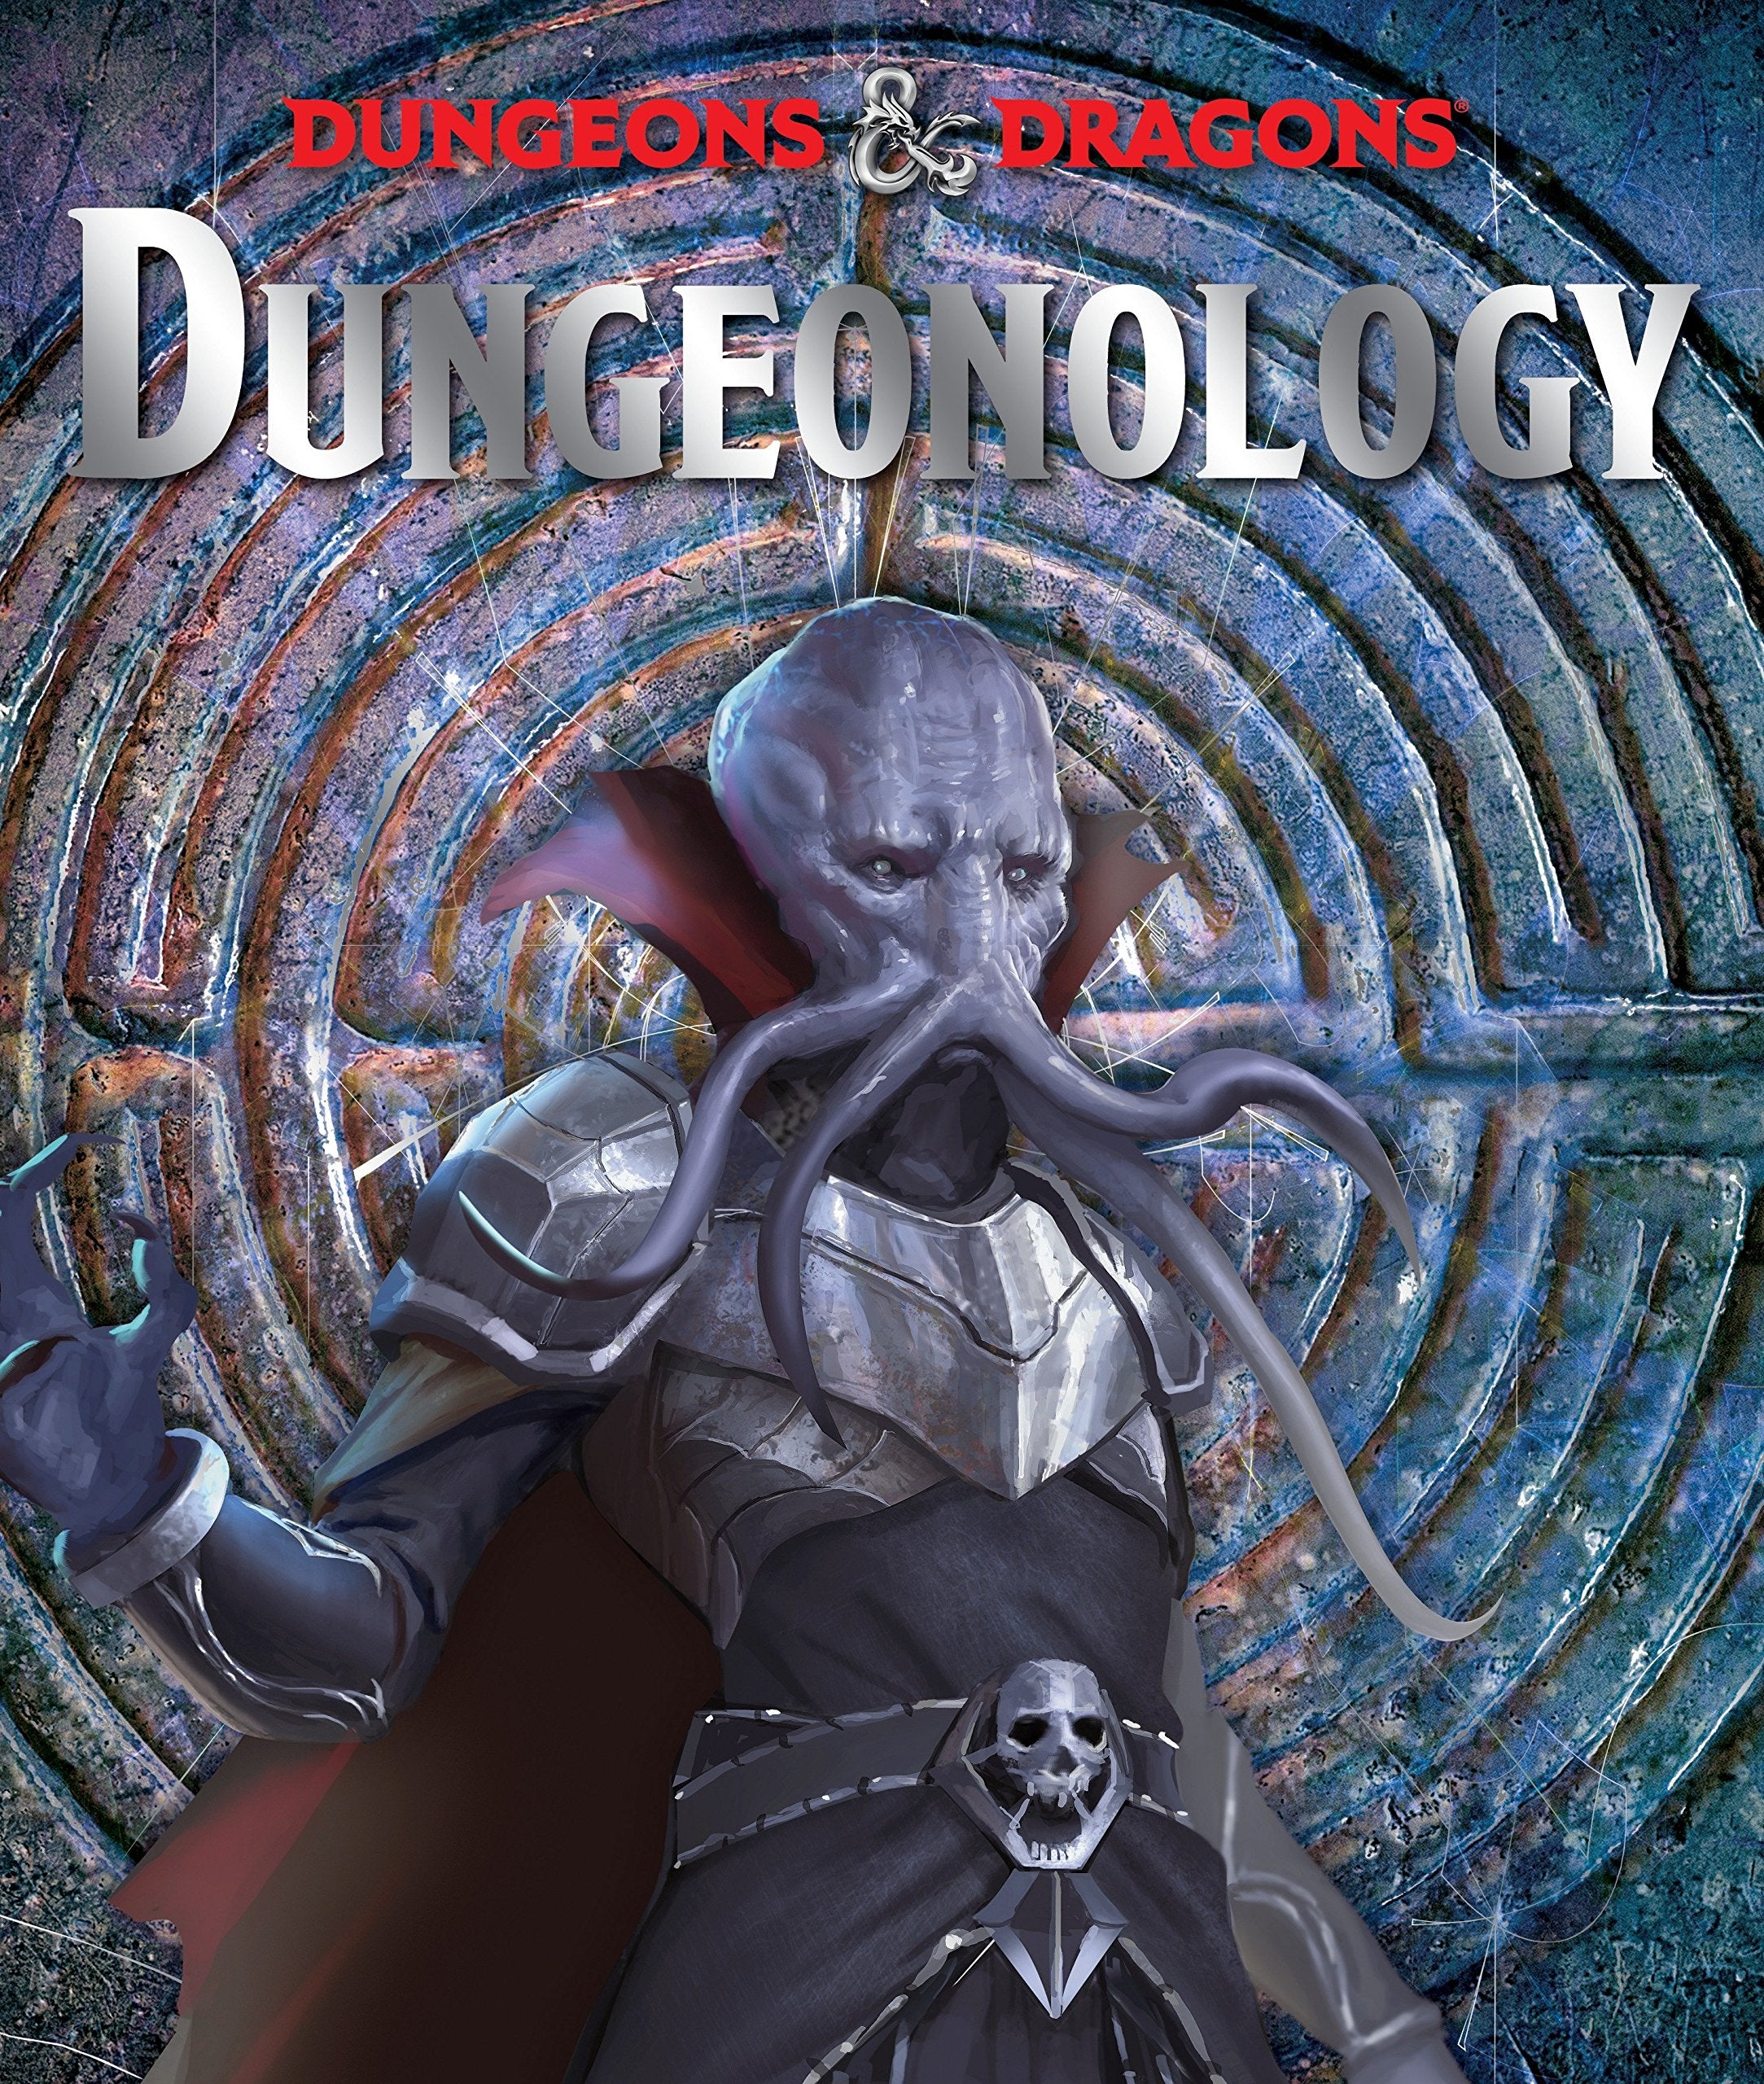 Dungeons & Dragons Dungeonology